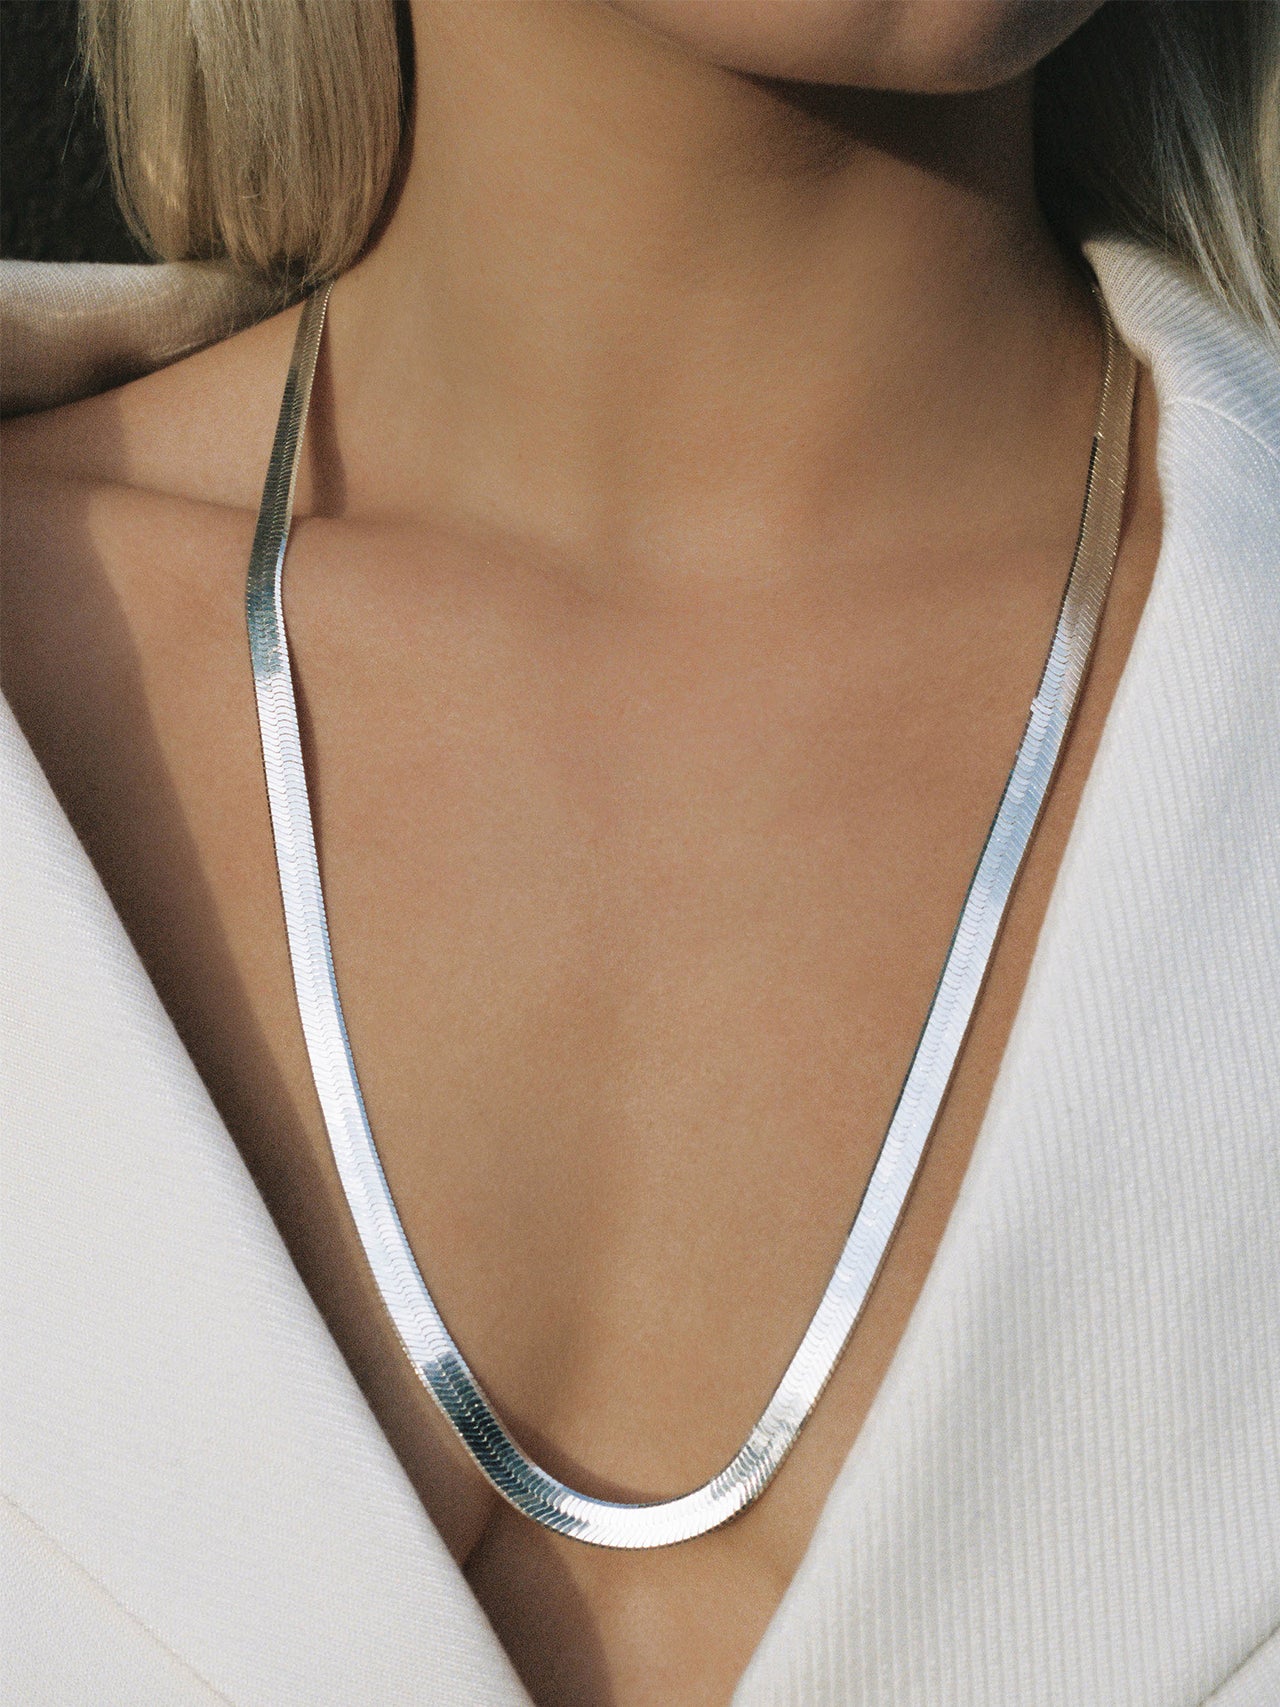 Ultra Sterling Silver Herringbone Necklace pictured on model.